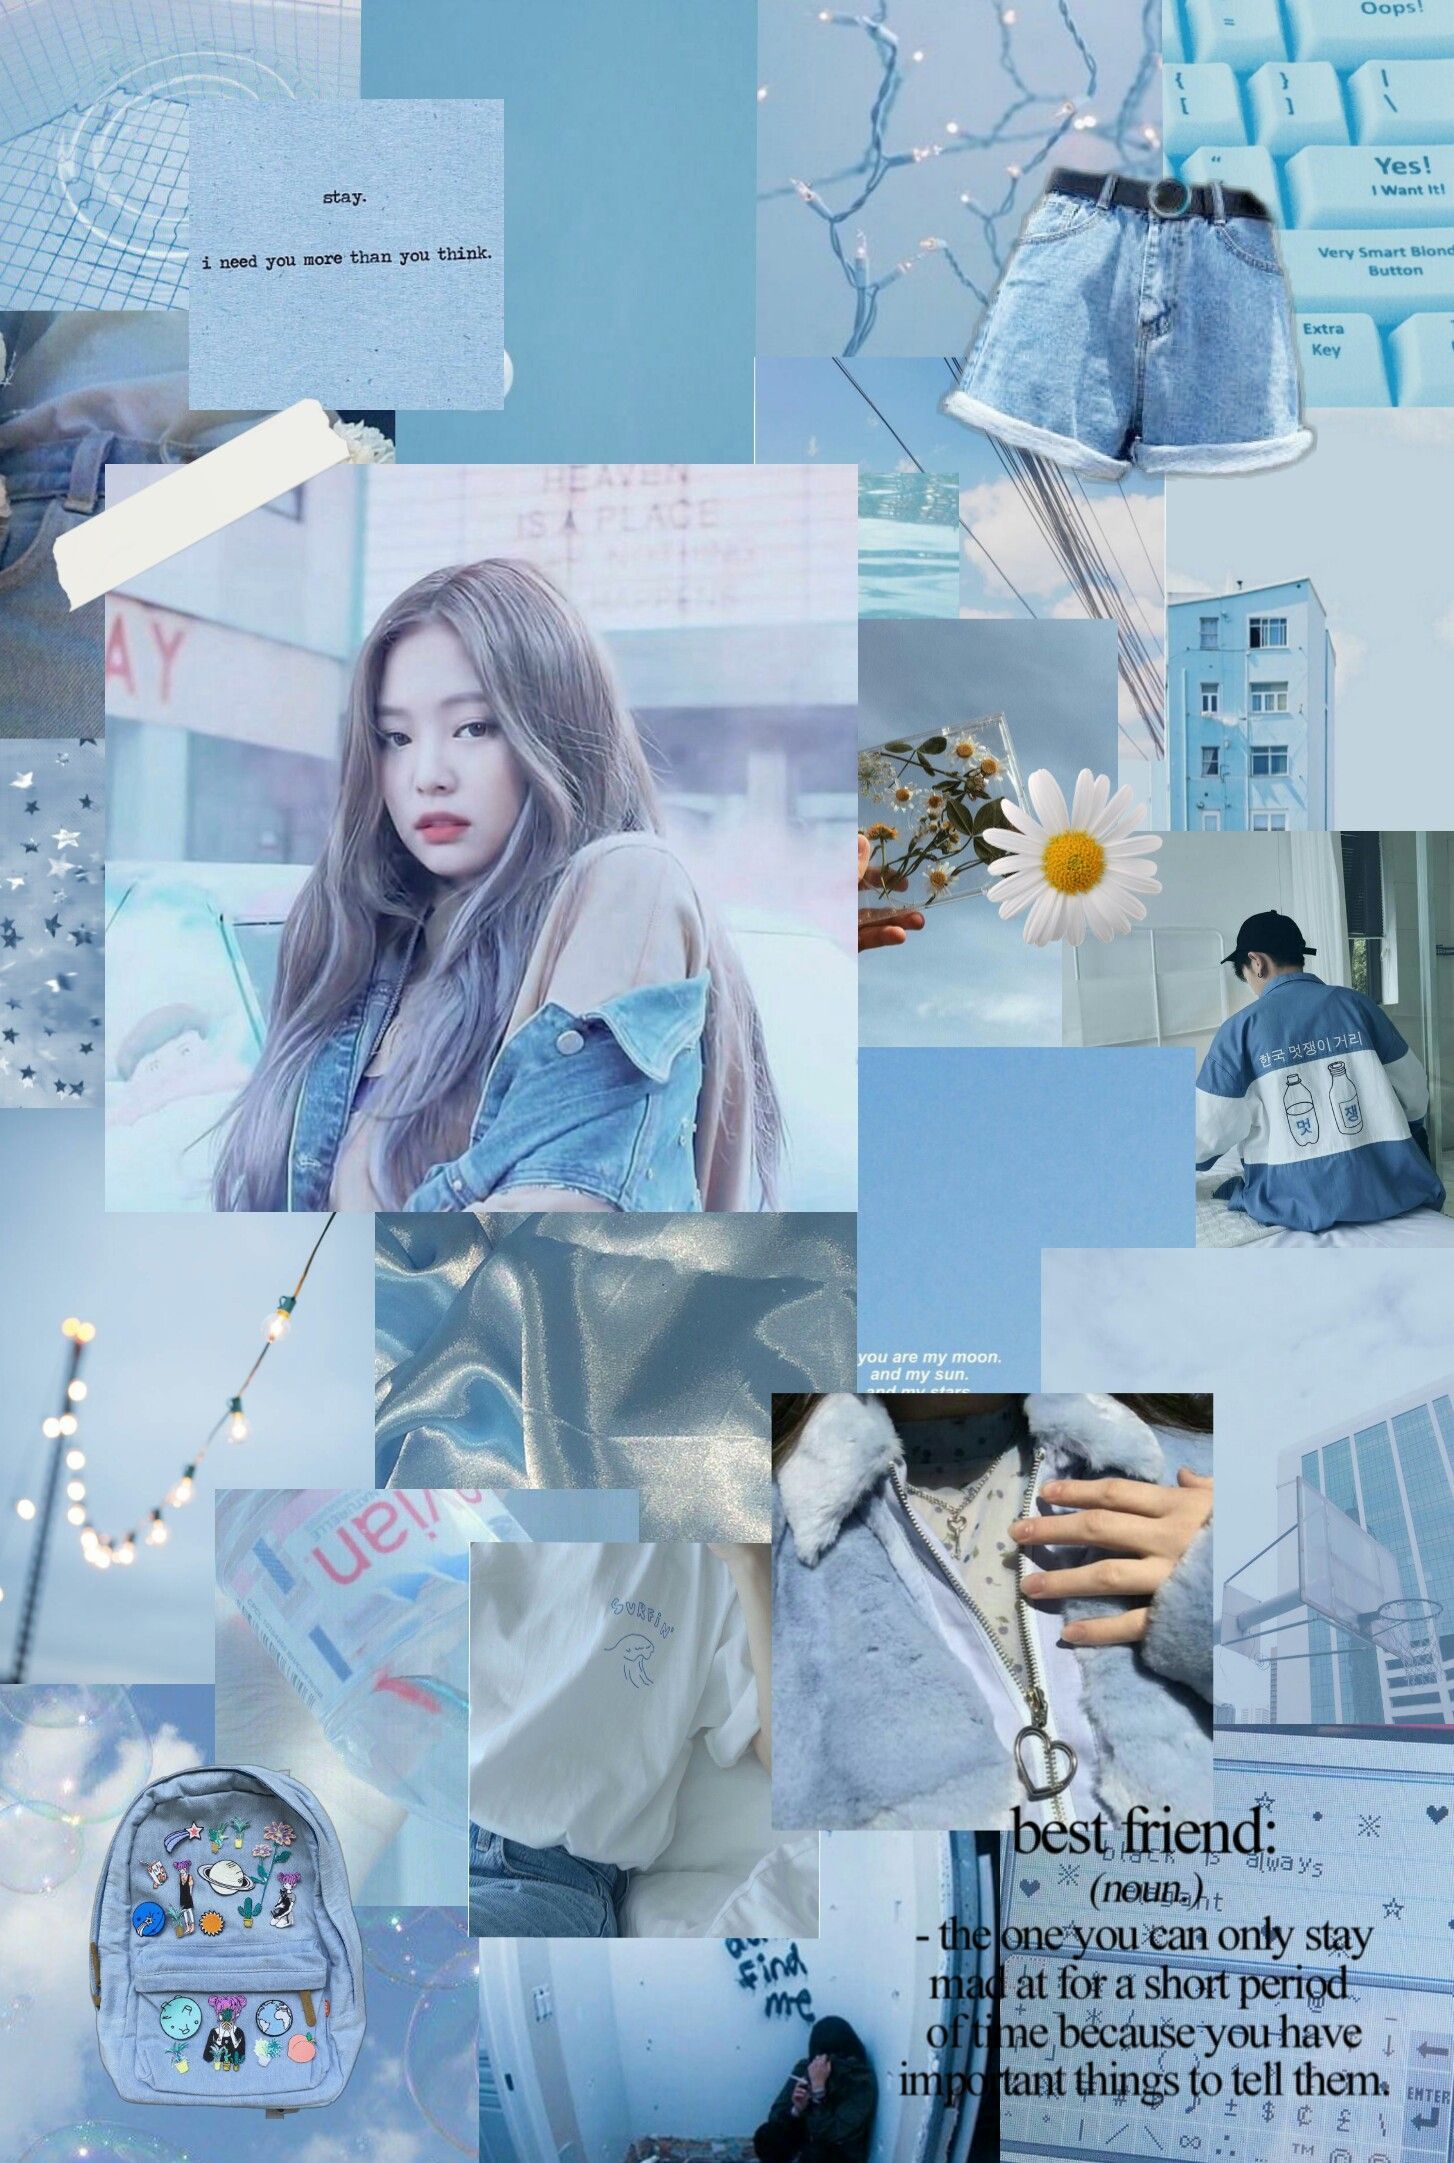 Aesthetic background featuring Hyuna from the K-pop group 4minute - BLACKPINK, Jennie